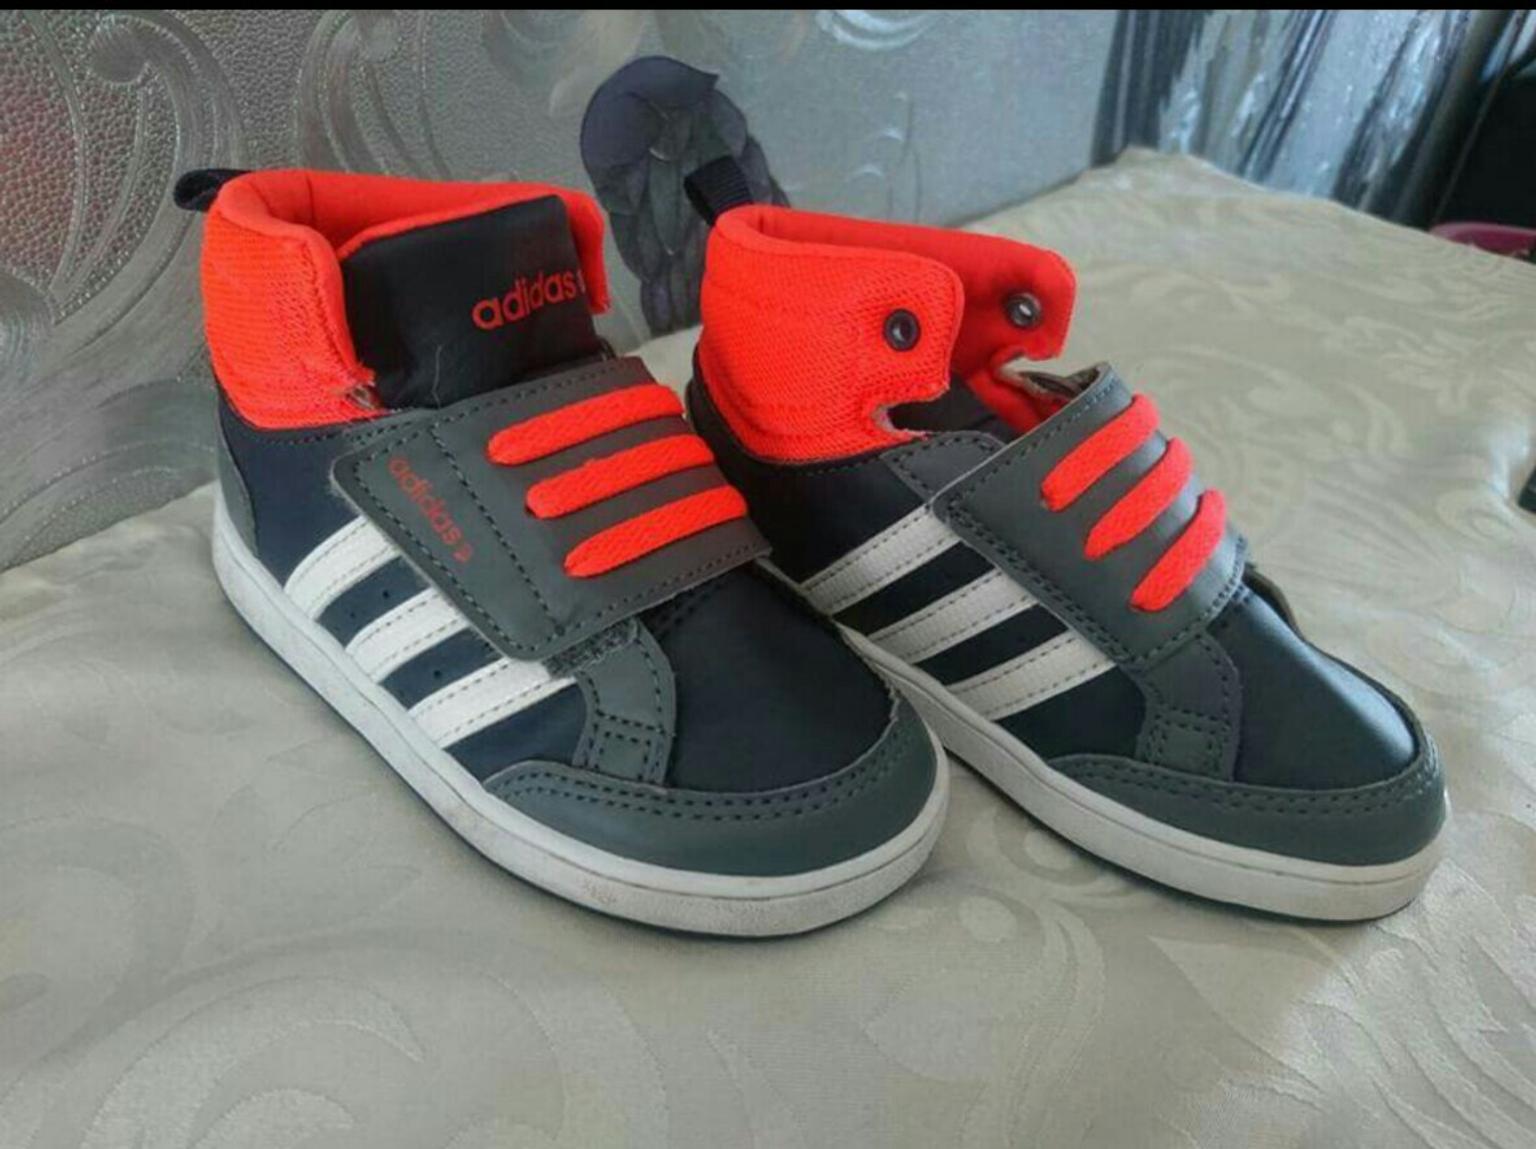 Adidas Neo schuhe gr. 25 in 52531 Übach-Palenberg for €20.00 for sale |  Shpock